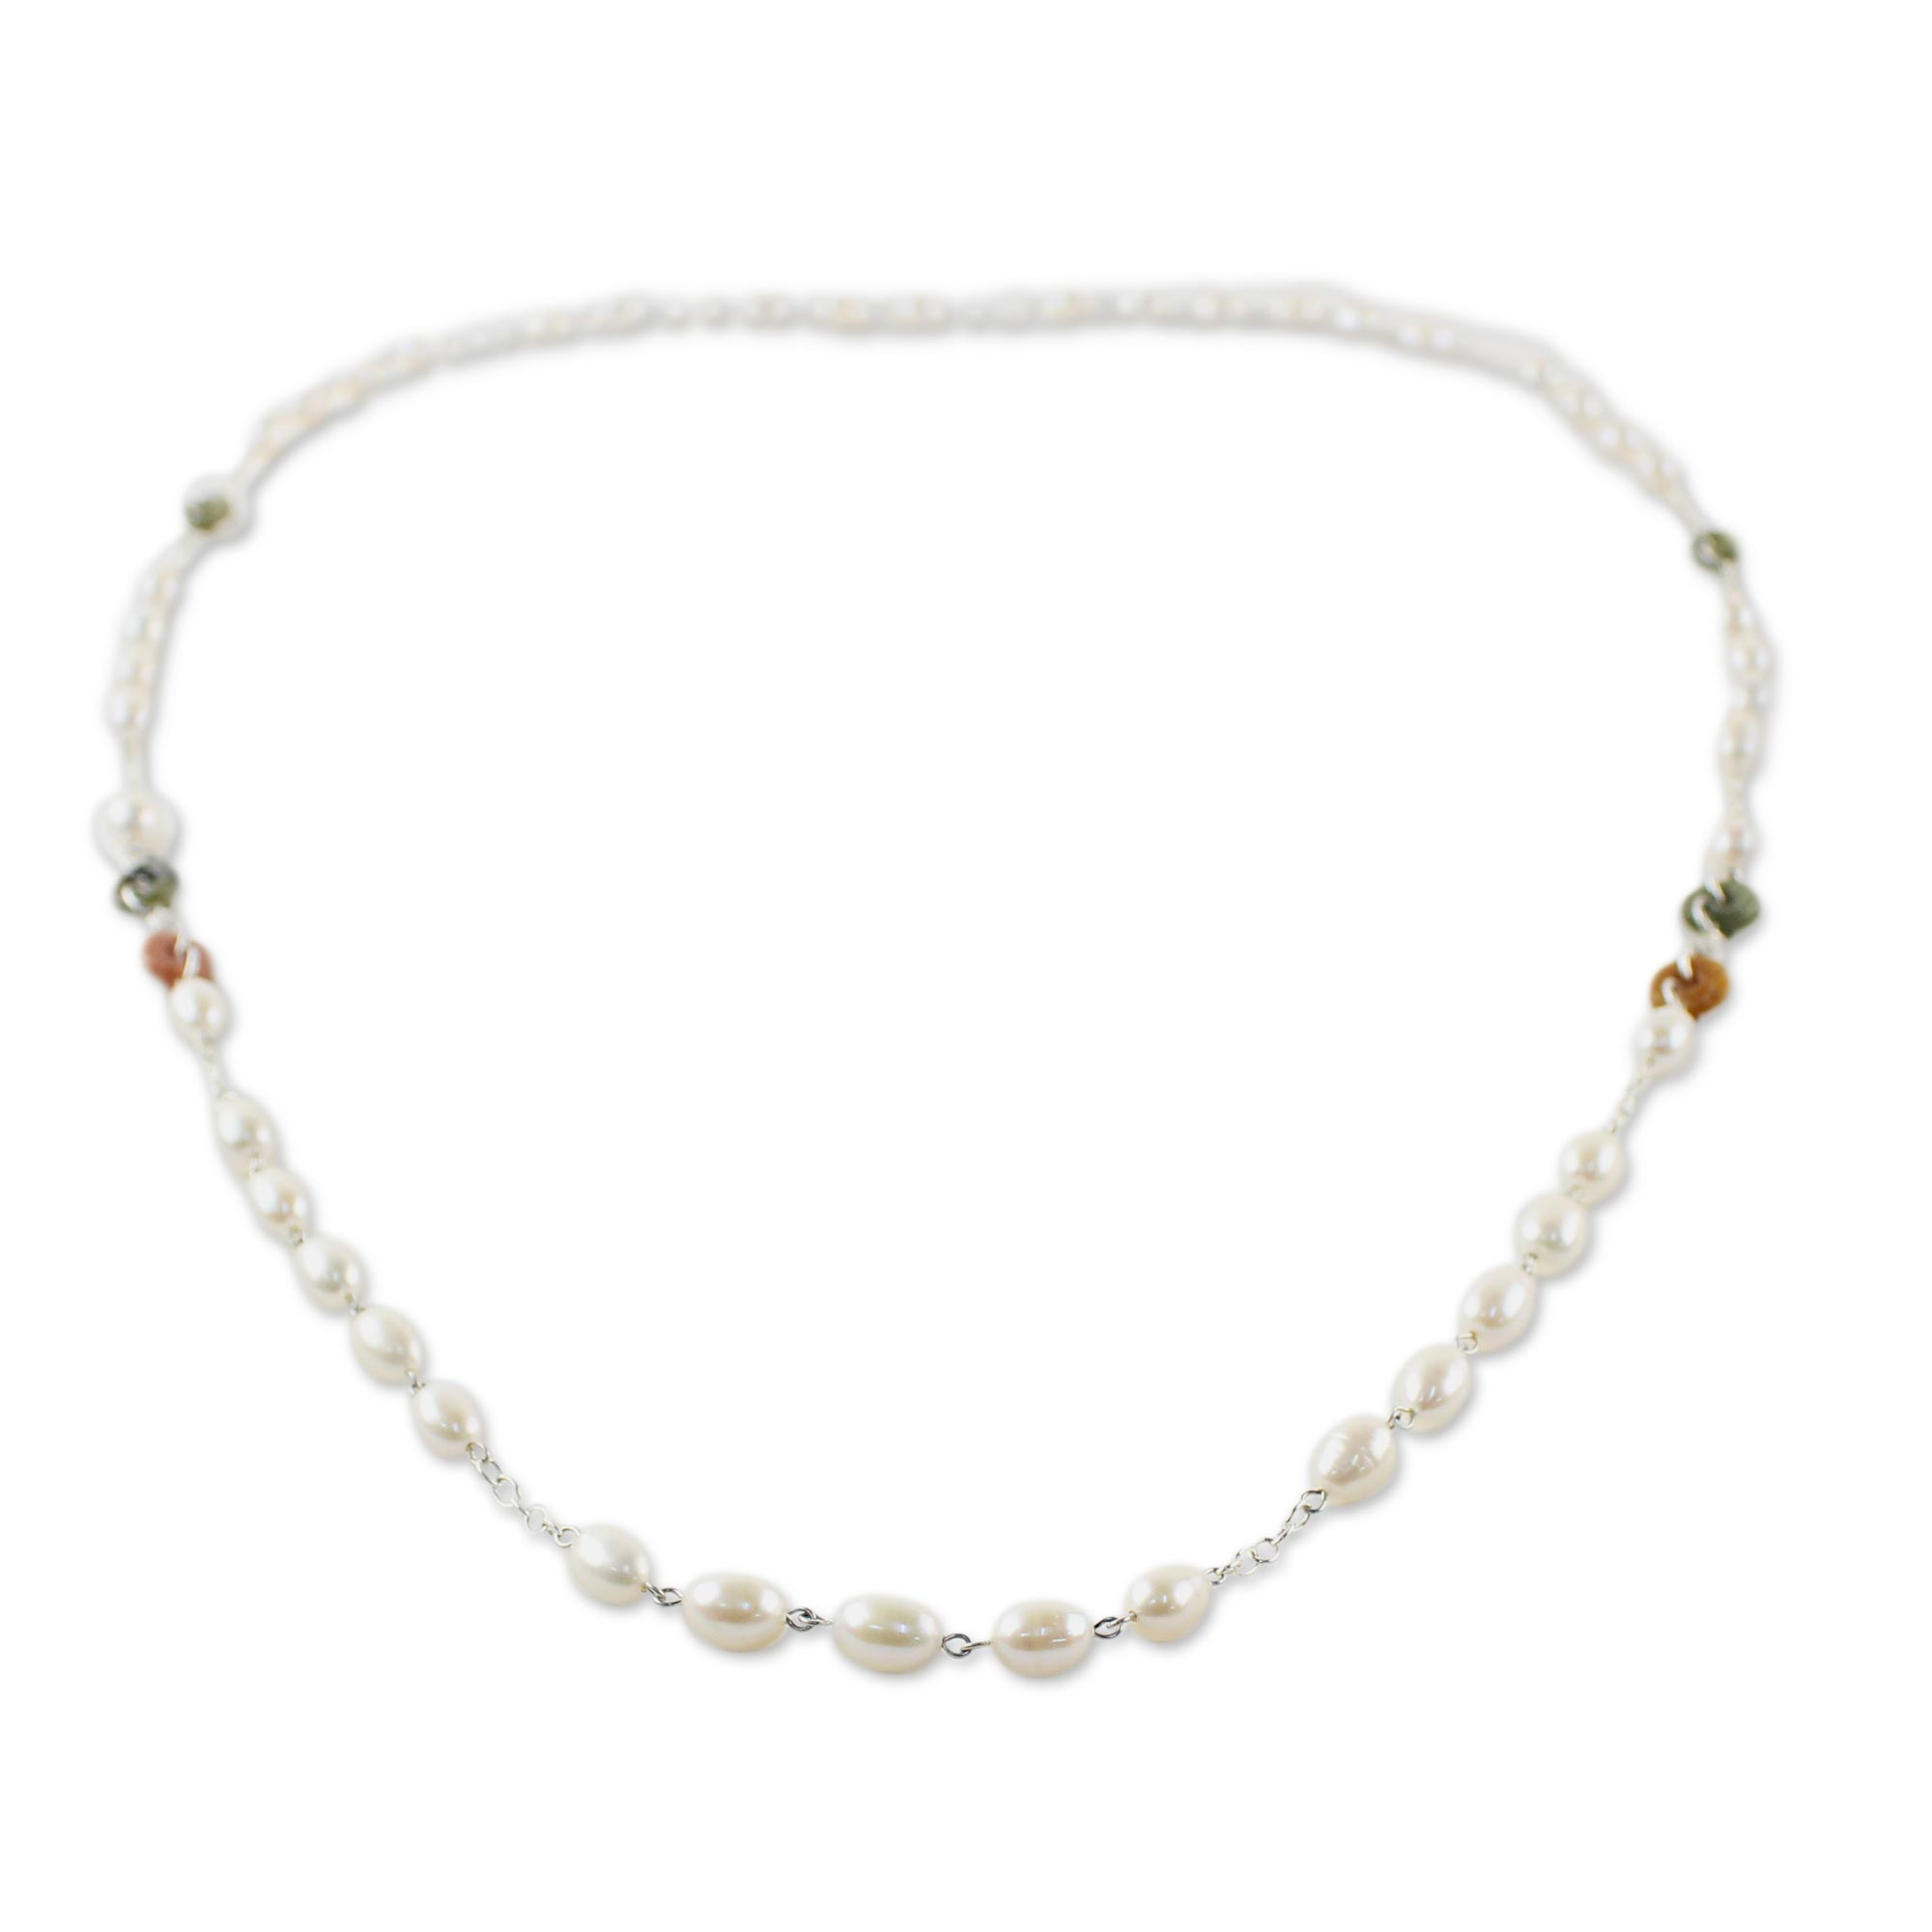 Station Necklace with Jade, Quartz and Cultured Pearl - Enduring ...